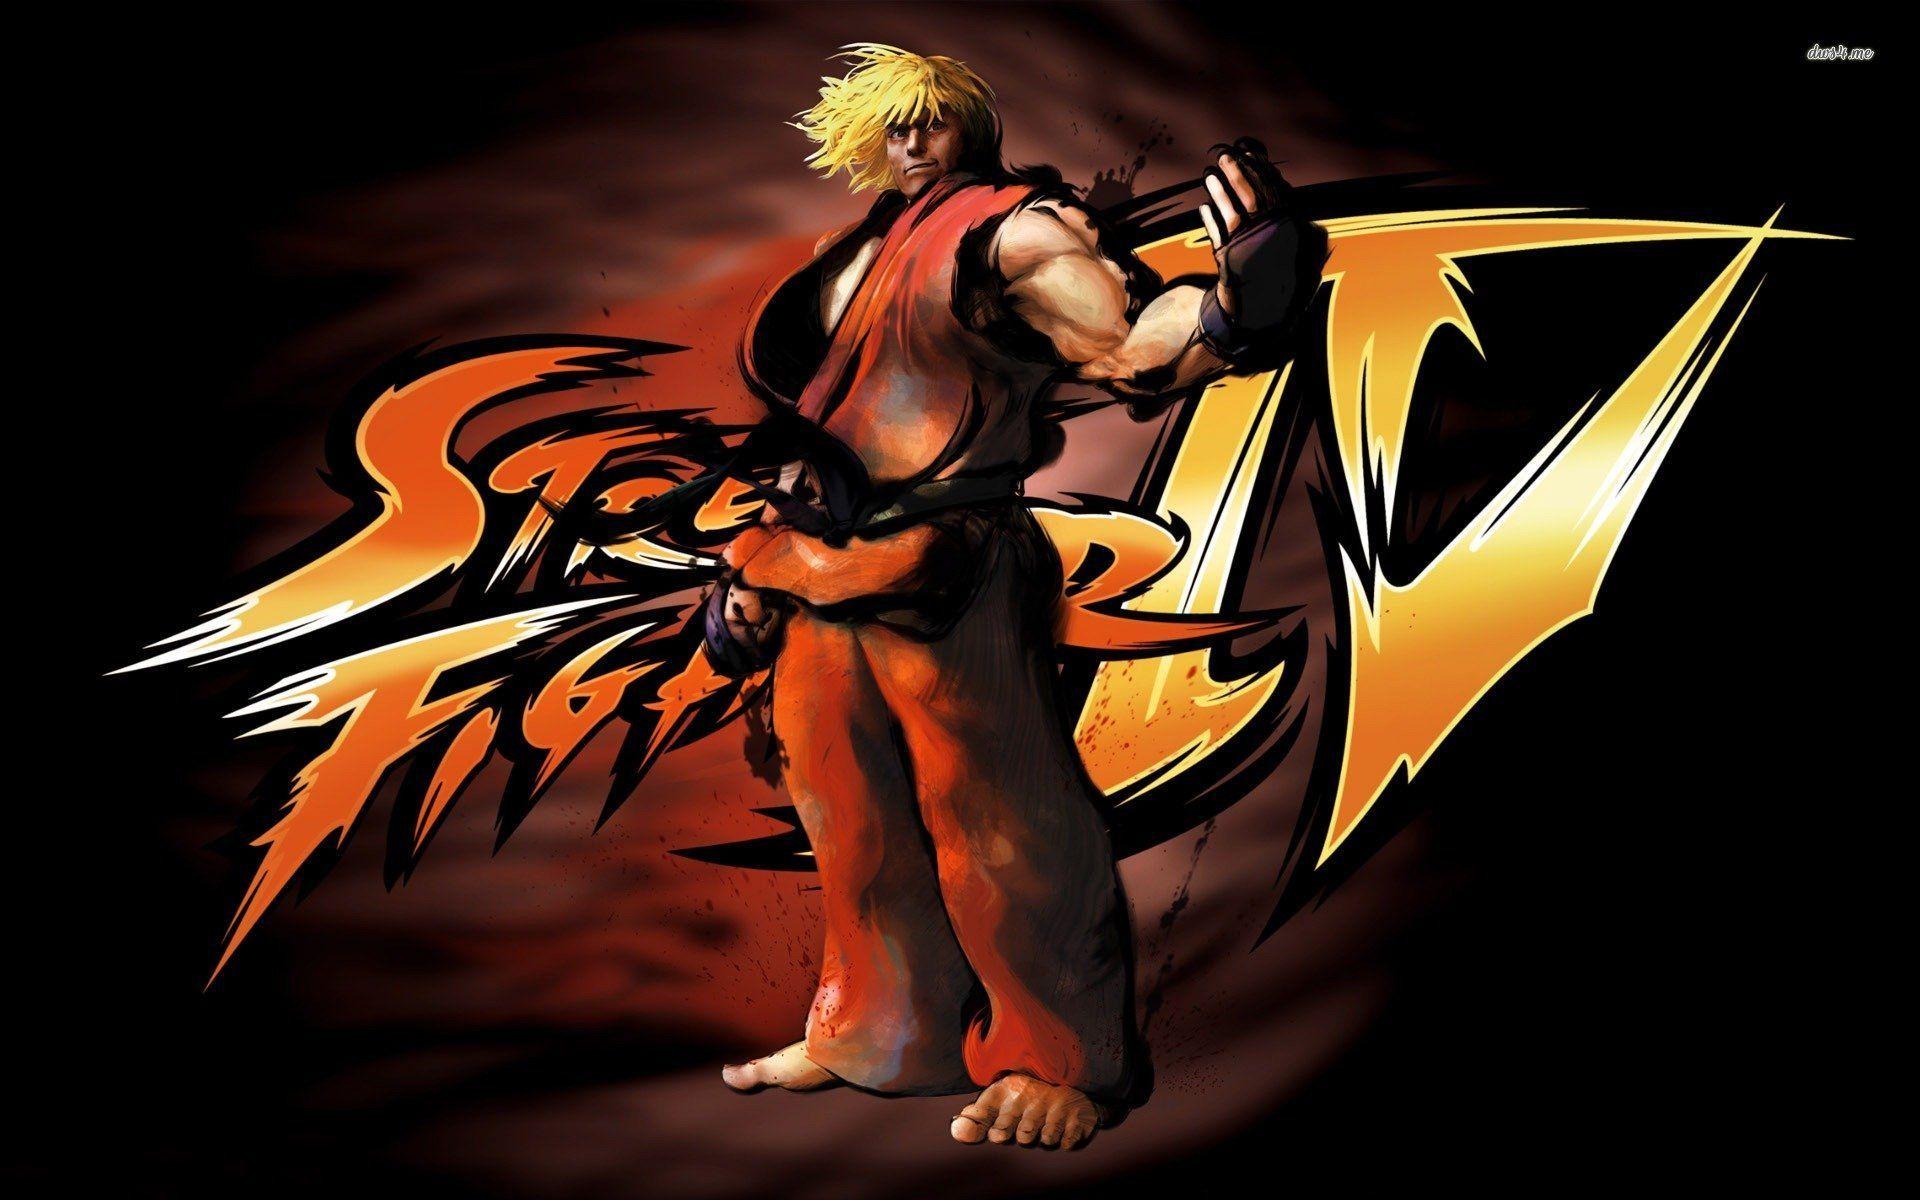 Ken Masters games wallpaper for cellphone download free. All